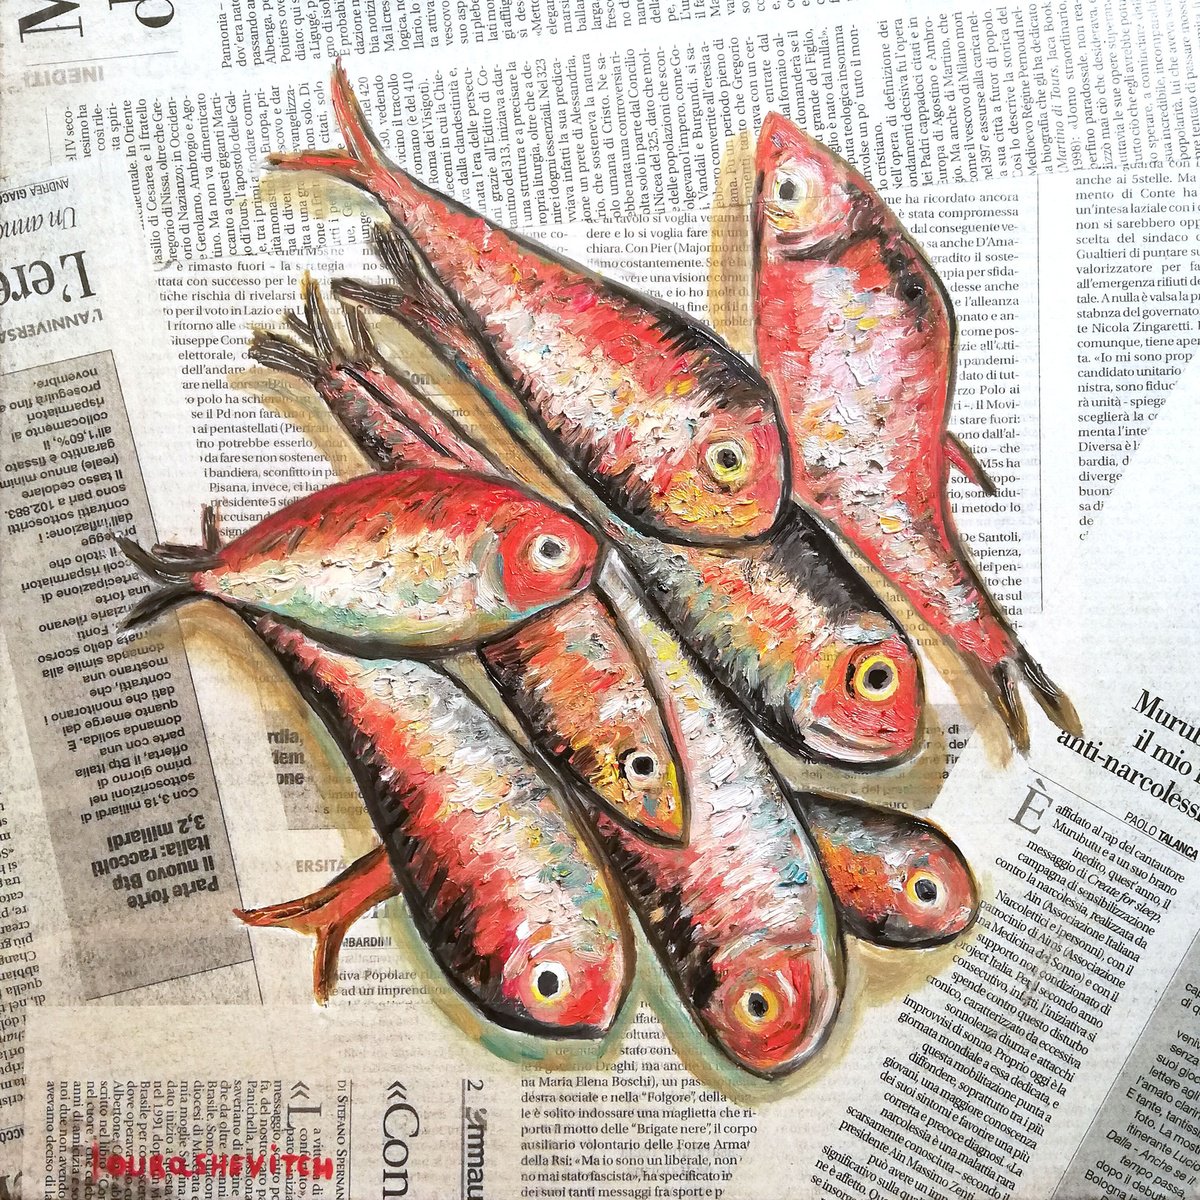 Red Fishes on Newspaper Original Oil on Canvas Board 12 by 12 inches (30x30 cm) by Katia Ricci